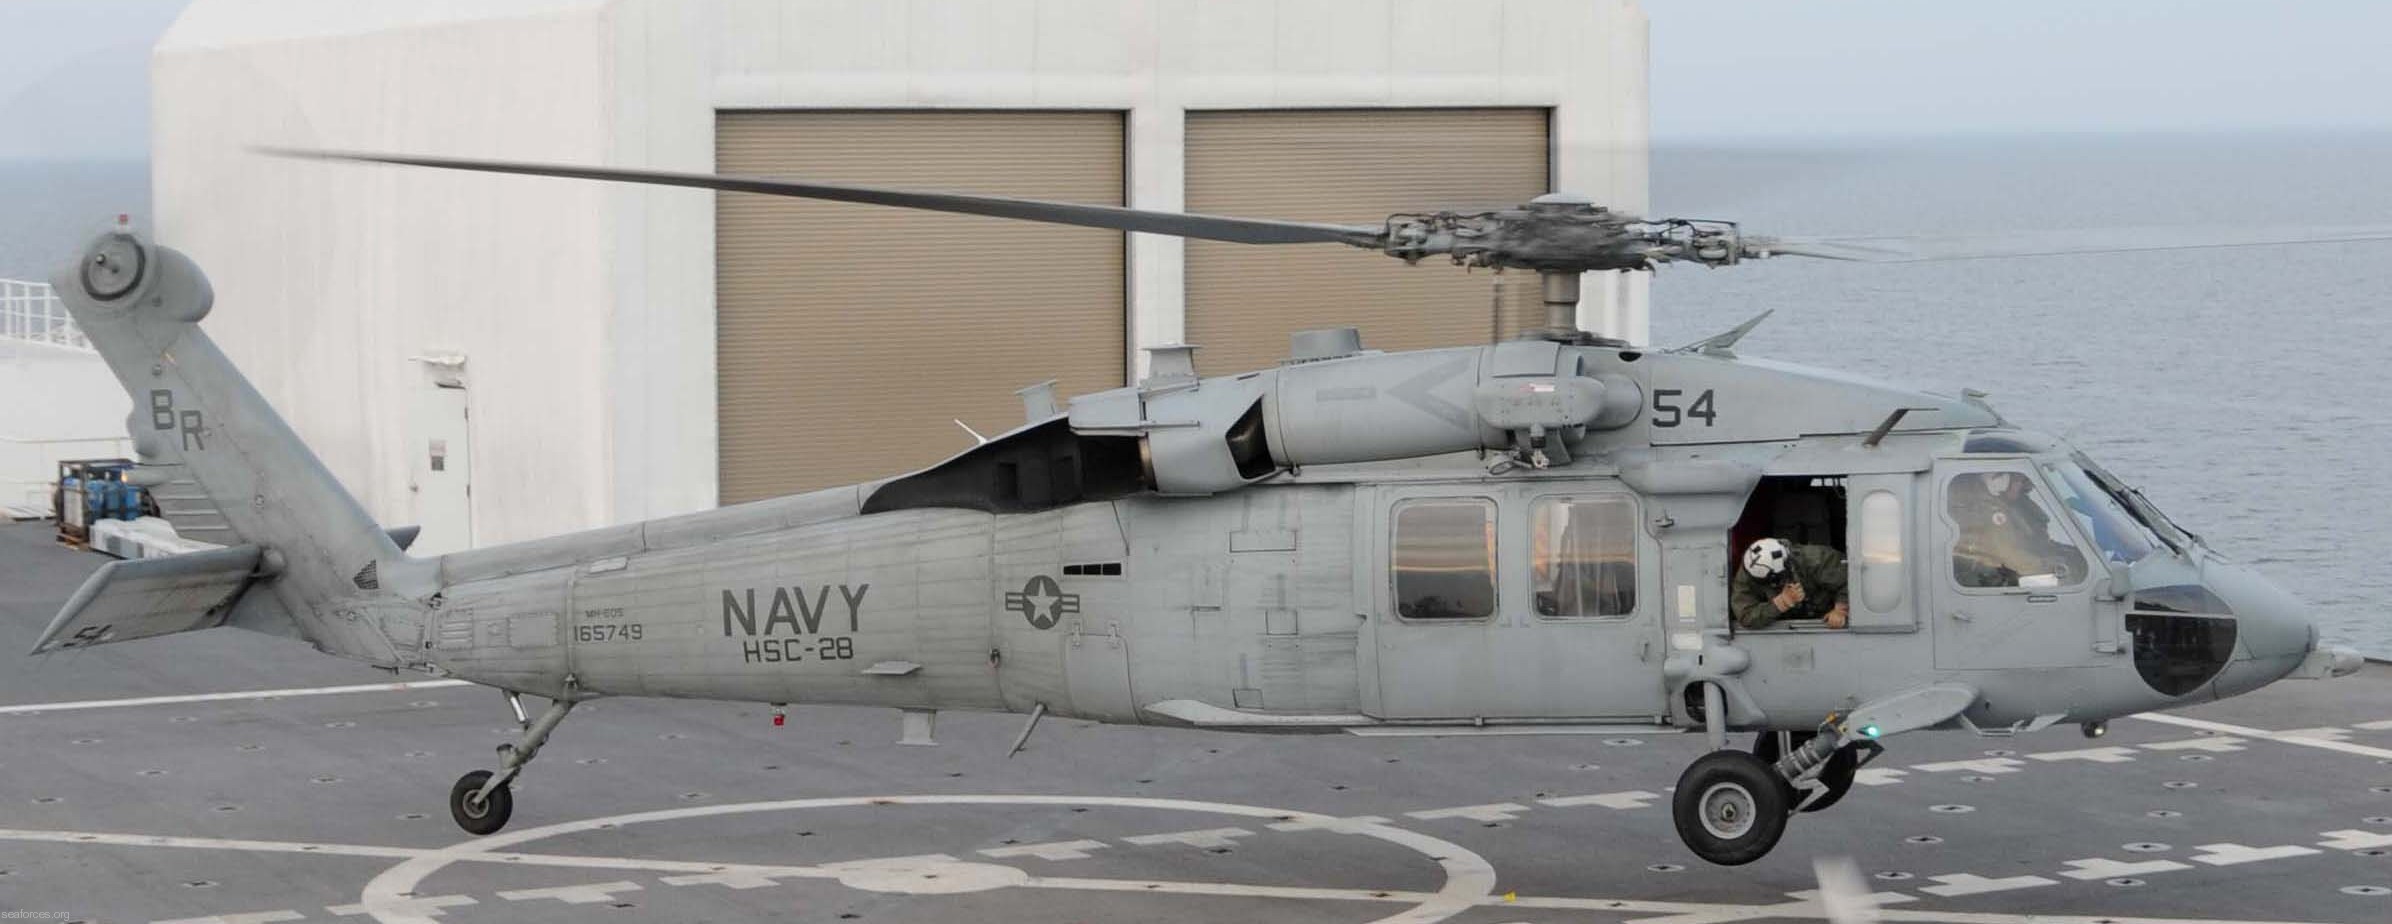 hsc-28 dragon whales helicopter sea combat squadron mh-60s seahawk us navy 160